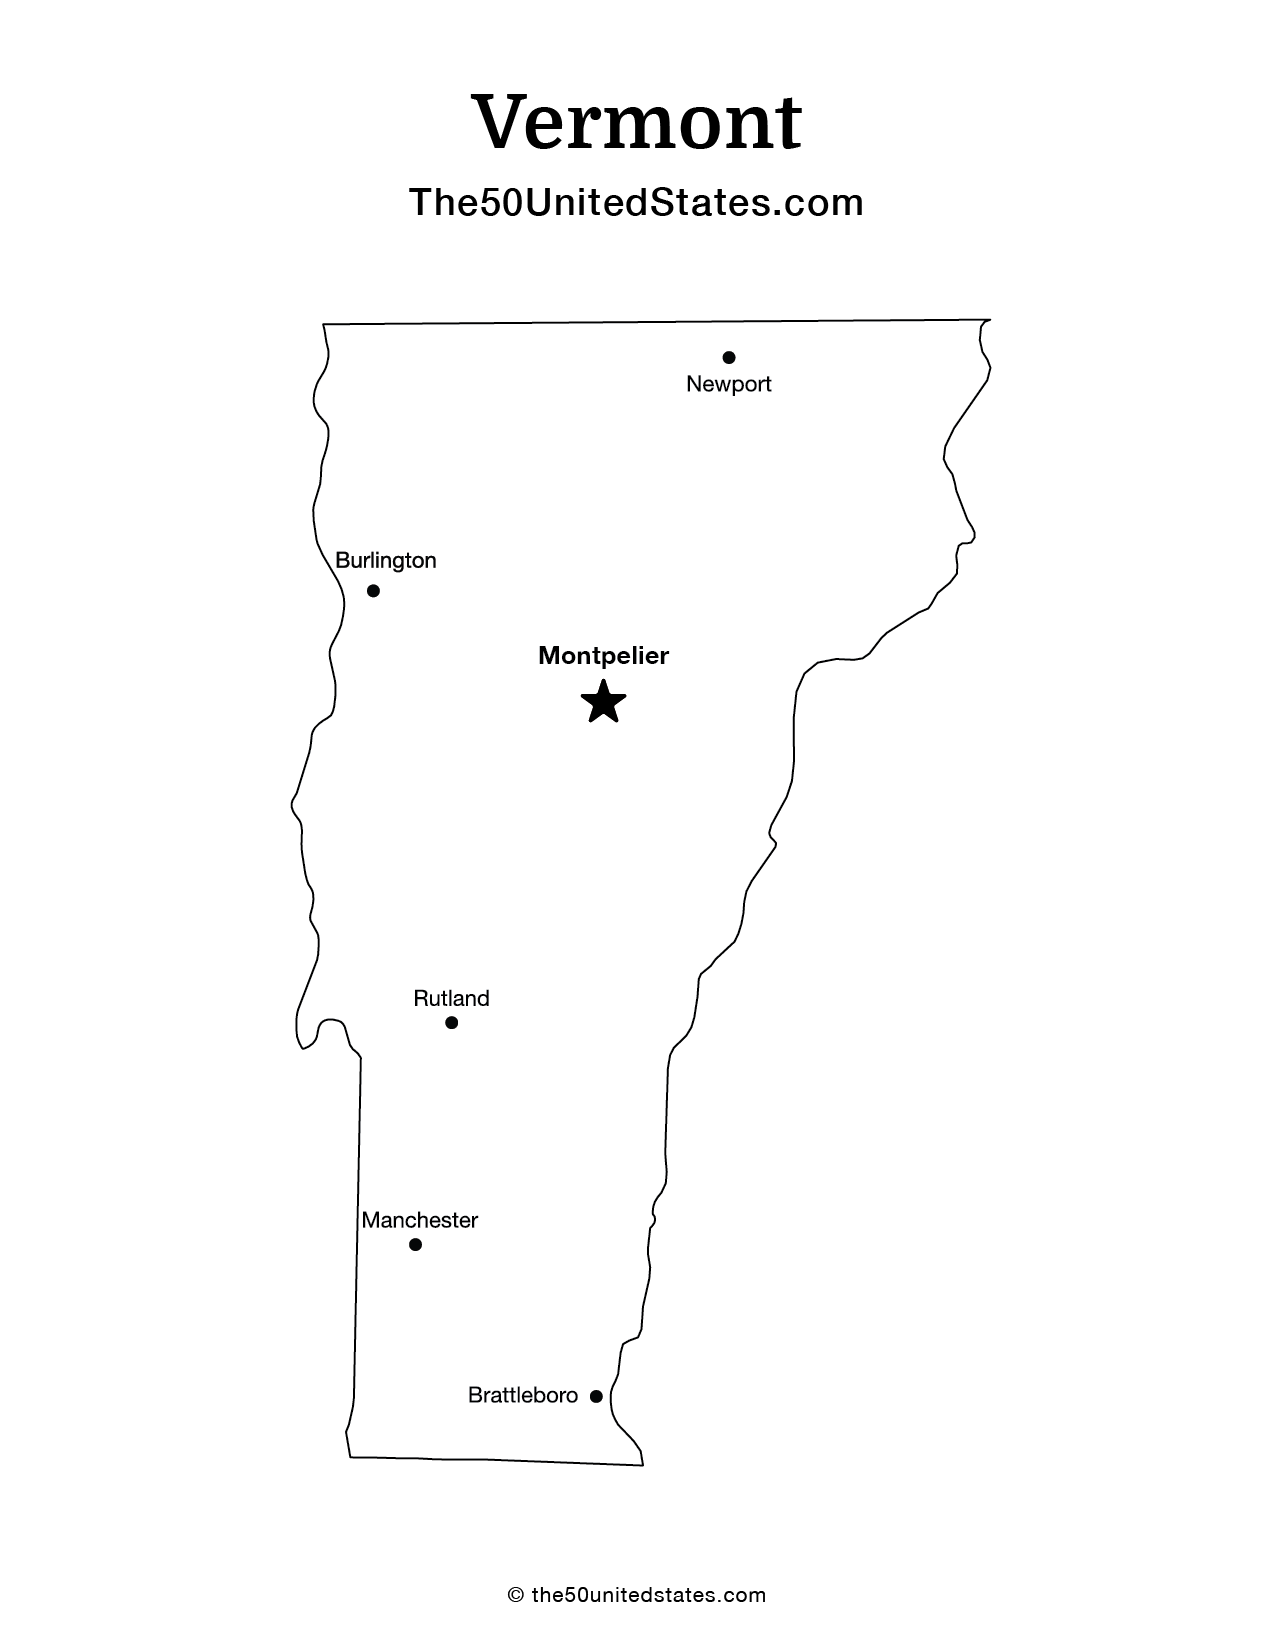 Vermont with Cities (Labeled)